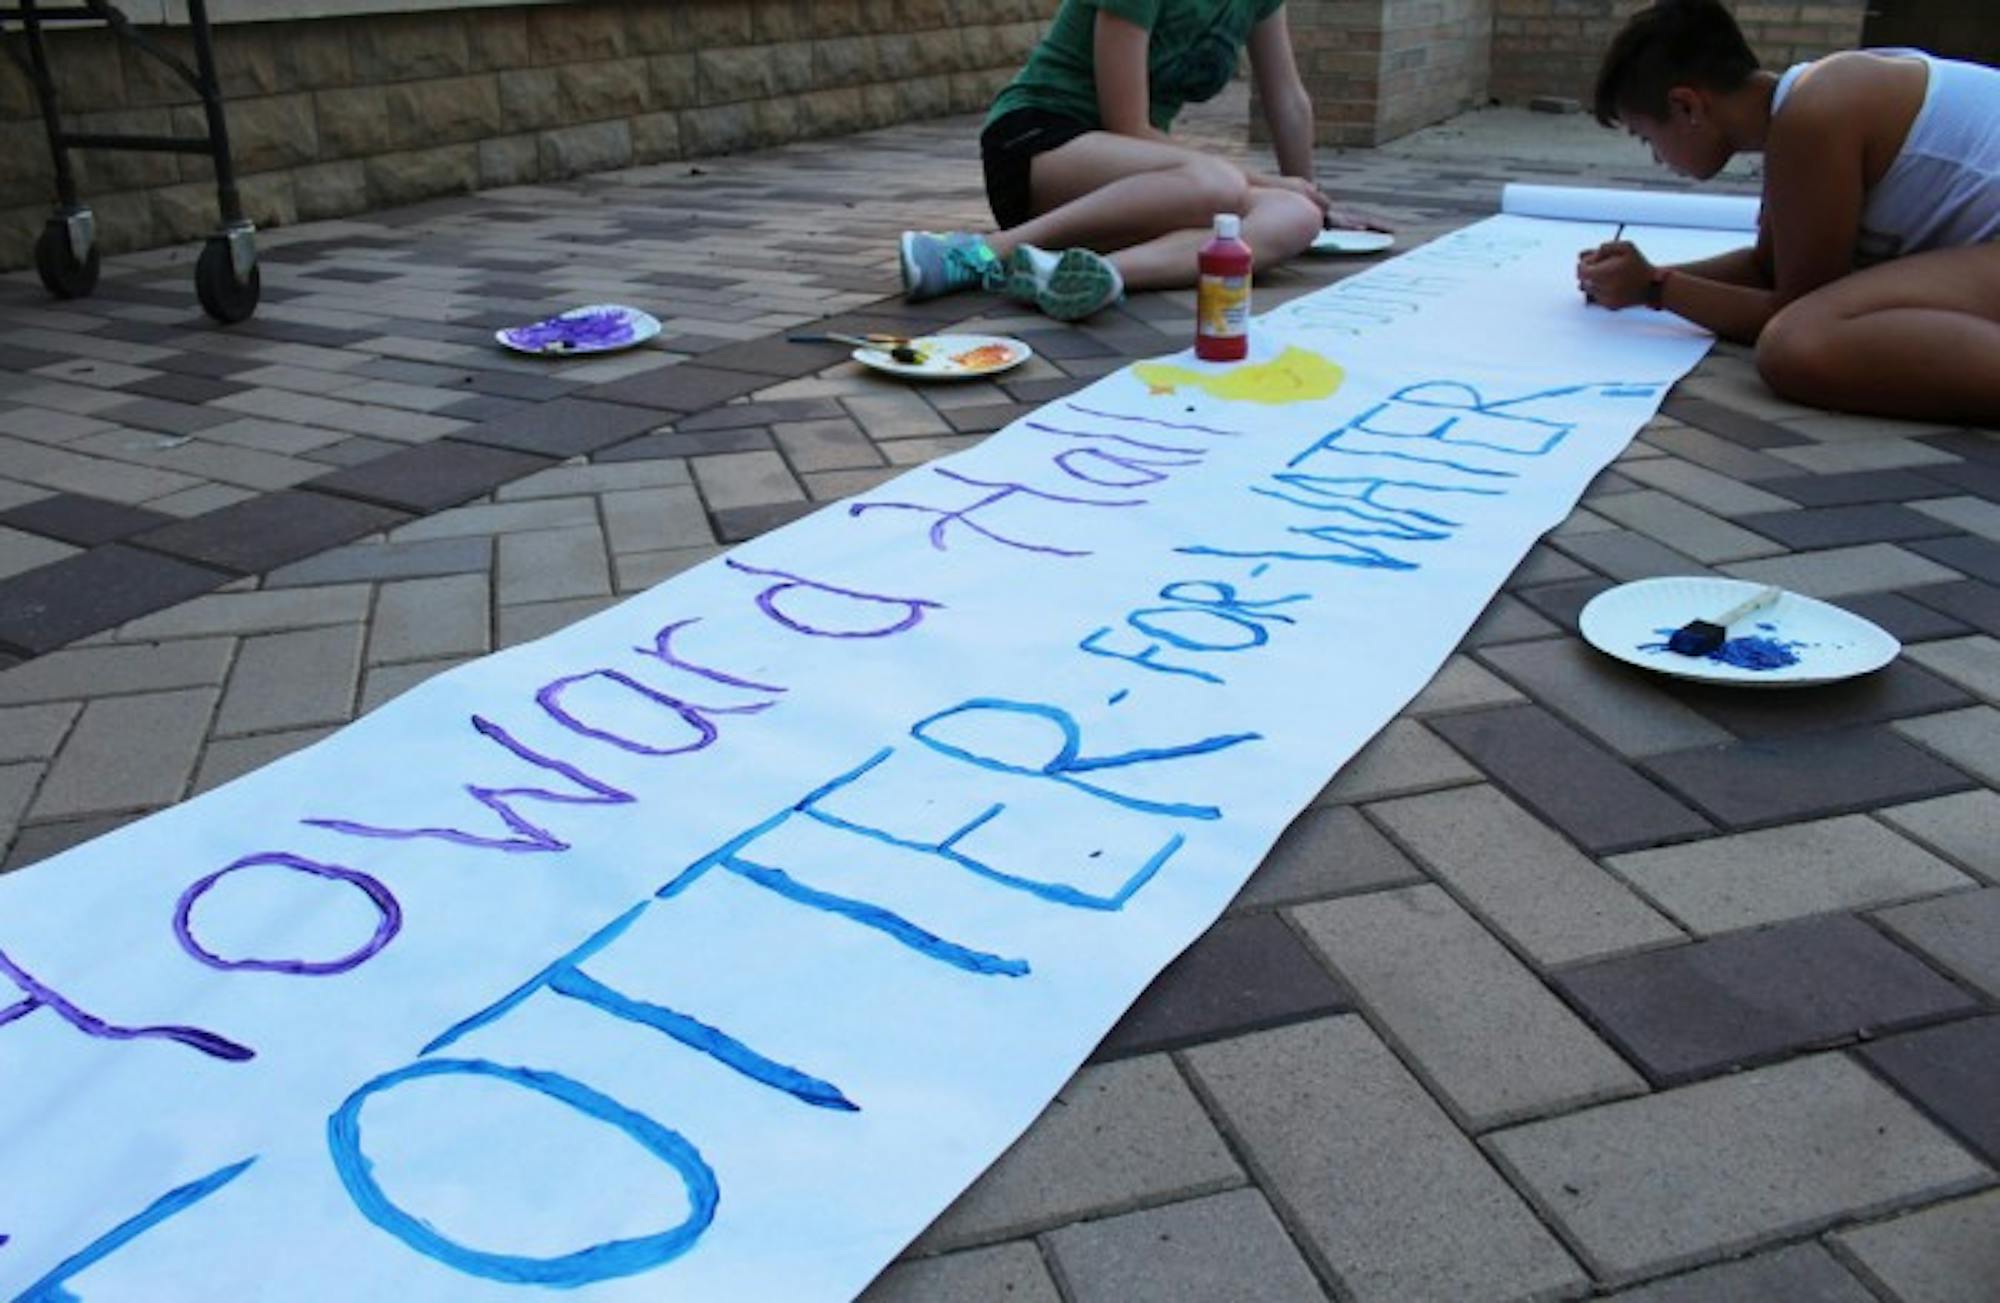 Howard Hall residents paint a banner for their signature event, Totter for Water. The event benefits Engineers Without Borders, an organization that works on sustainability issues.